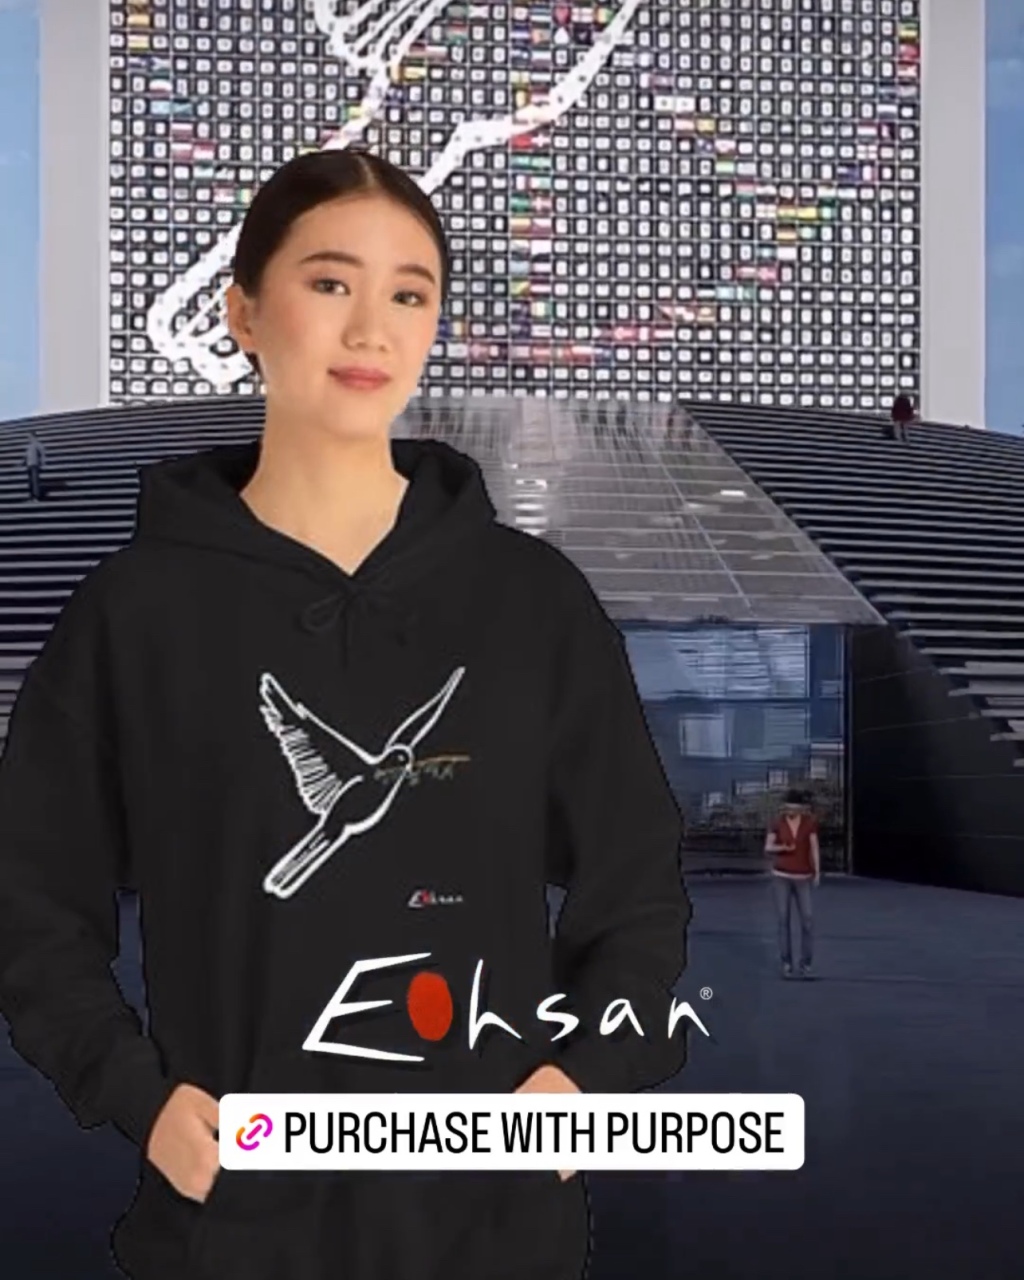 Visions by Ehsan “Purchase with Purpose” Campaign